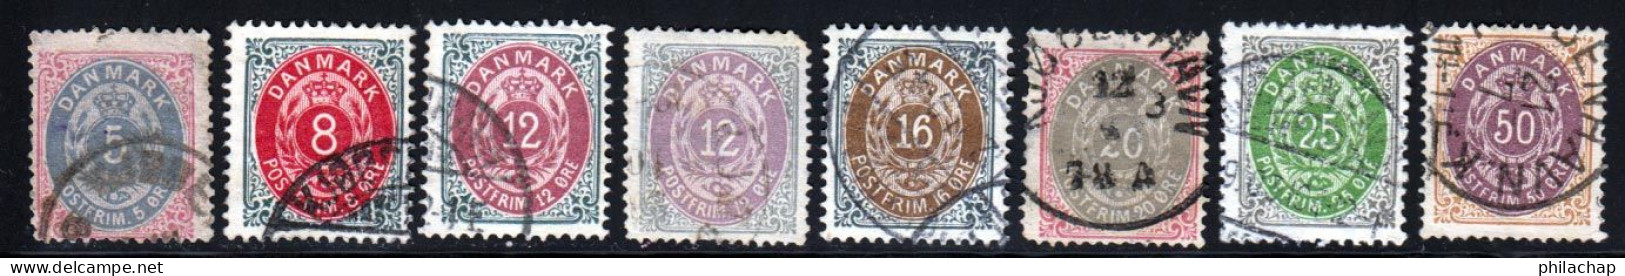 Danemark 1875 Yvert 23AB-24B-25B-25aB-26B-26AB-27B-28B (o) B Oblitere(s) - Used Stamps